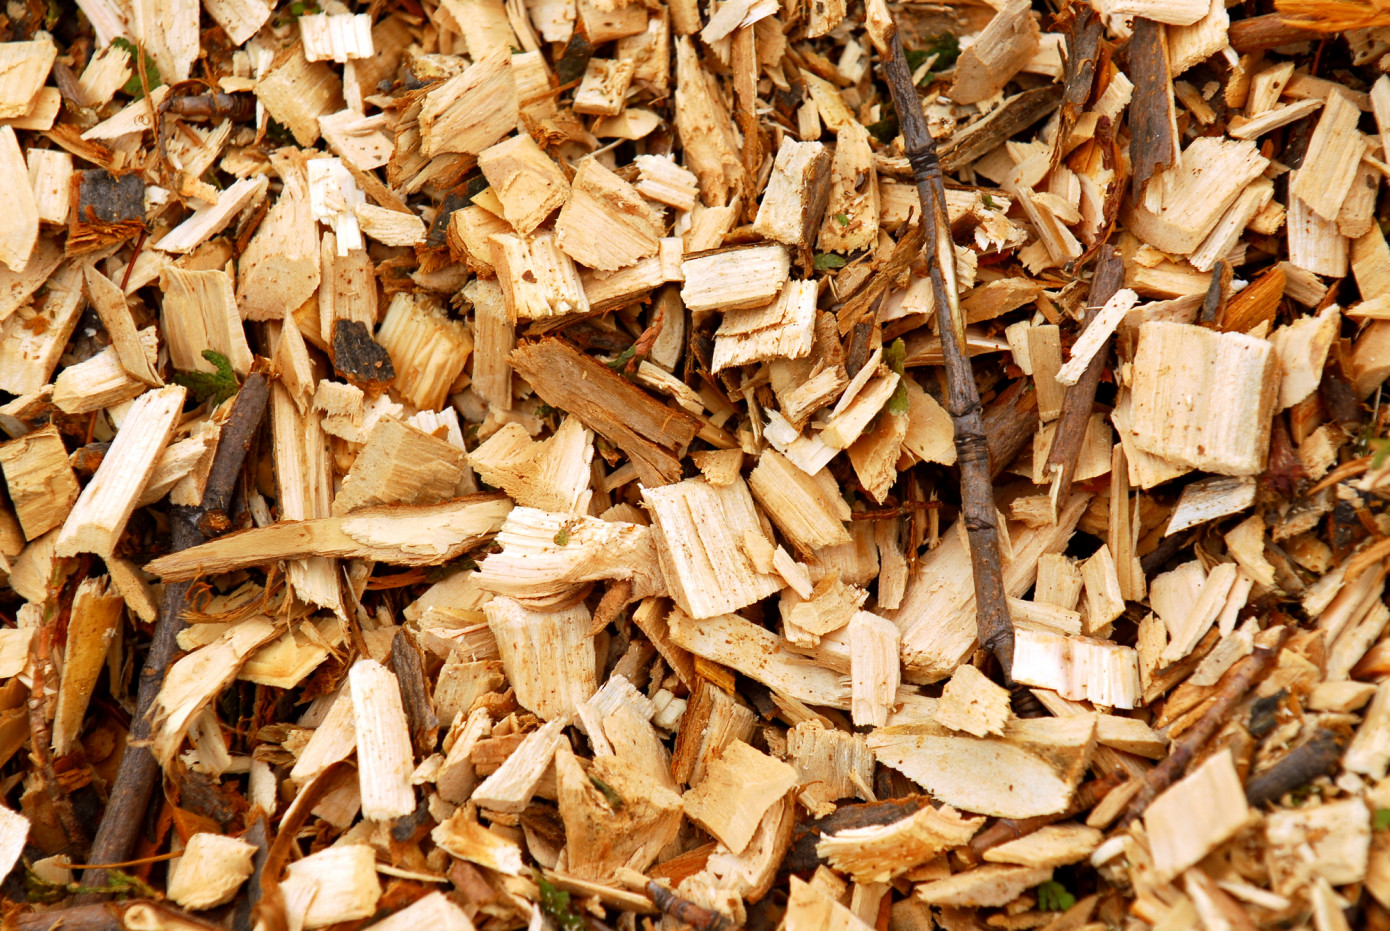 Imports of wood chips to European Union decline 65% in December